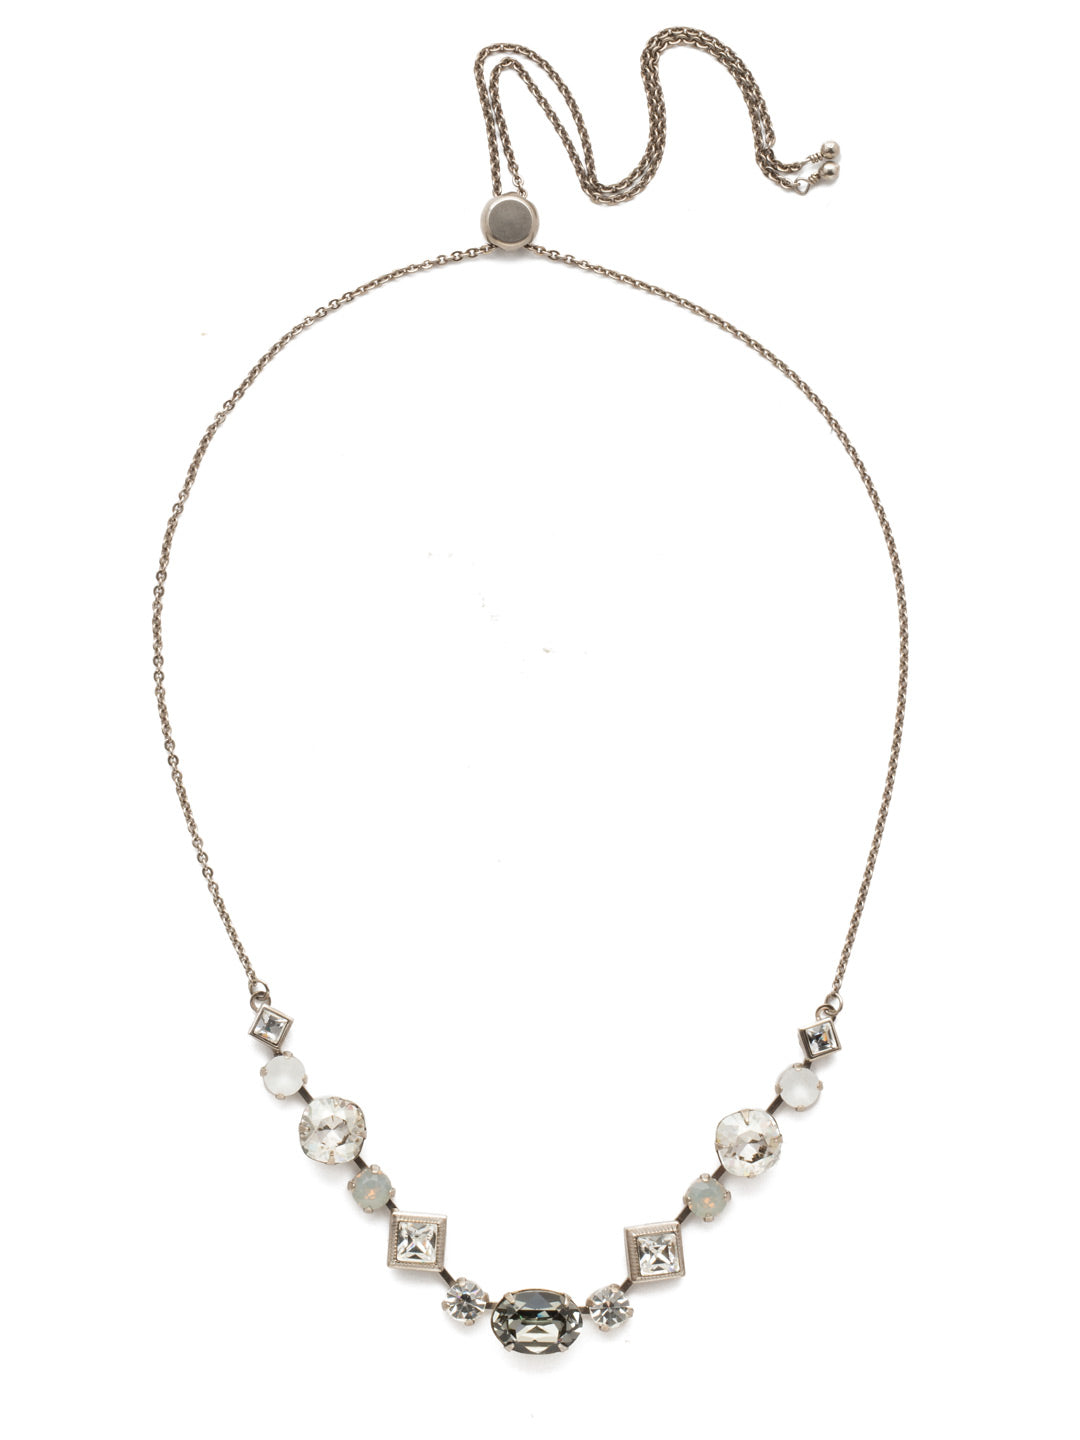 Cordelia Tennis Necklace - NEK29ASSTC - Can't decide on a favorite gem shape? Good news! We've got you covered with this classic necklace perfect for a romantic night out, or for making an ordinary outfit extra special. From Sorrelli's Storm Clouds collection in our Antique Silver-tone finish.